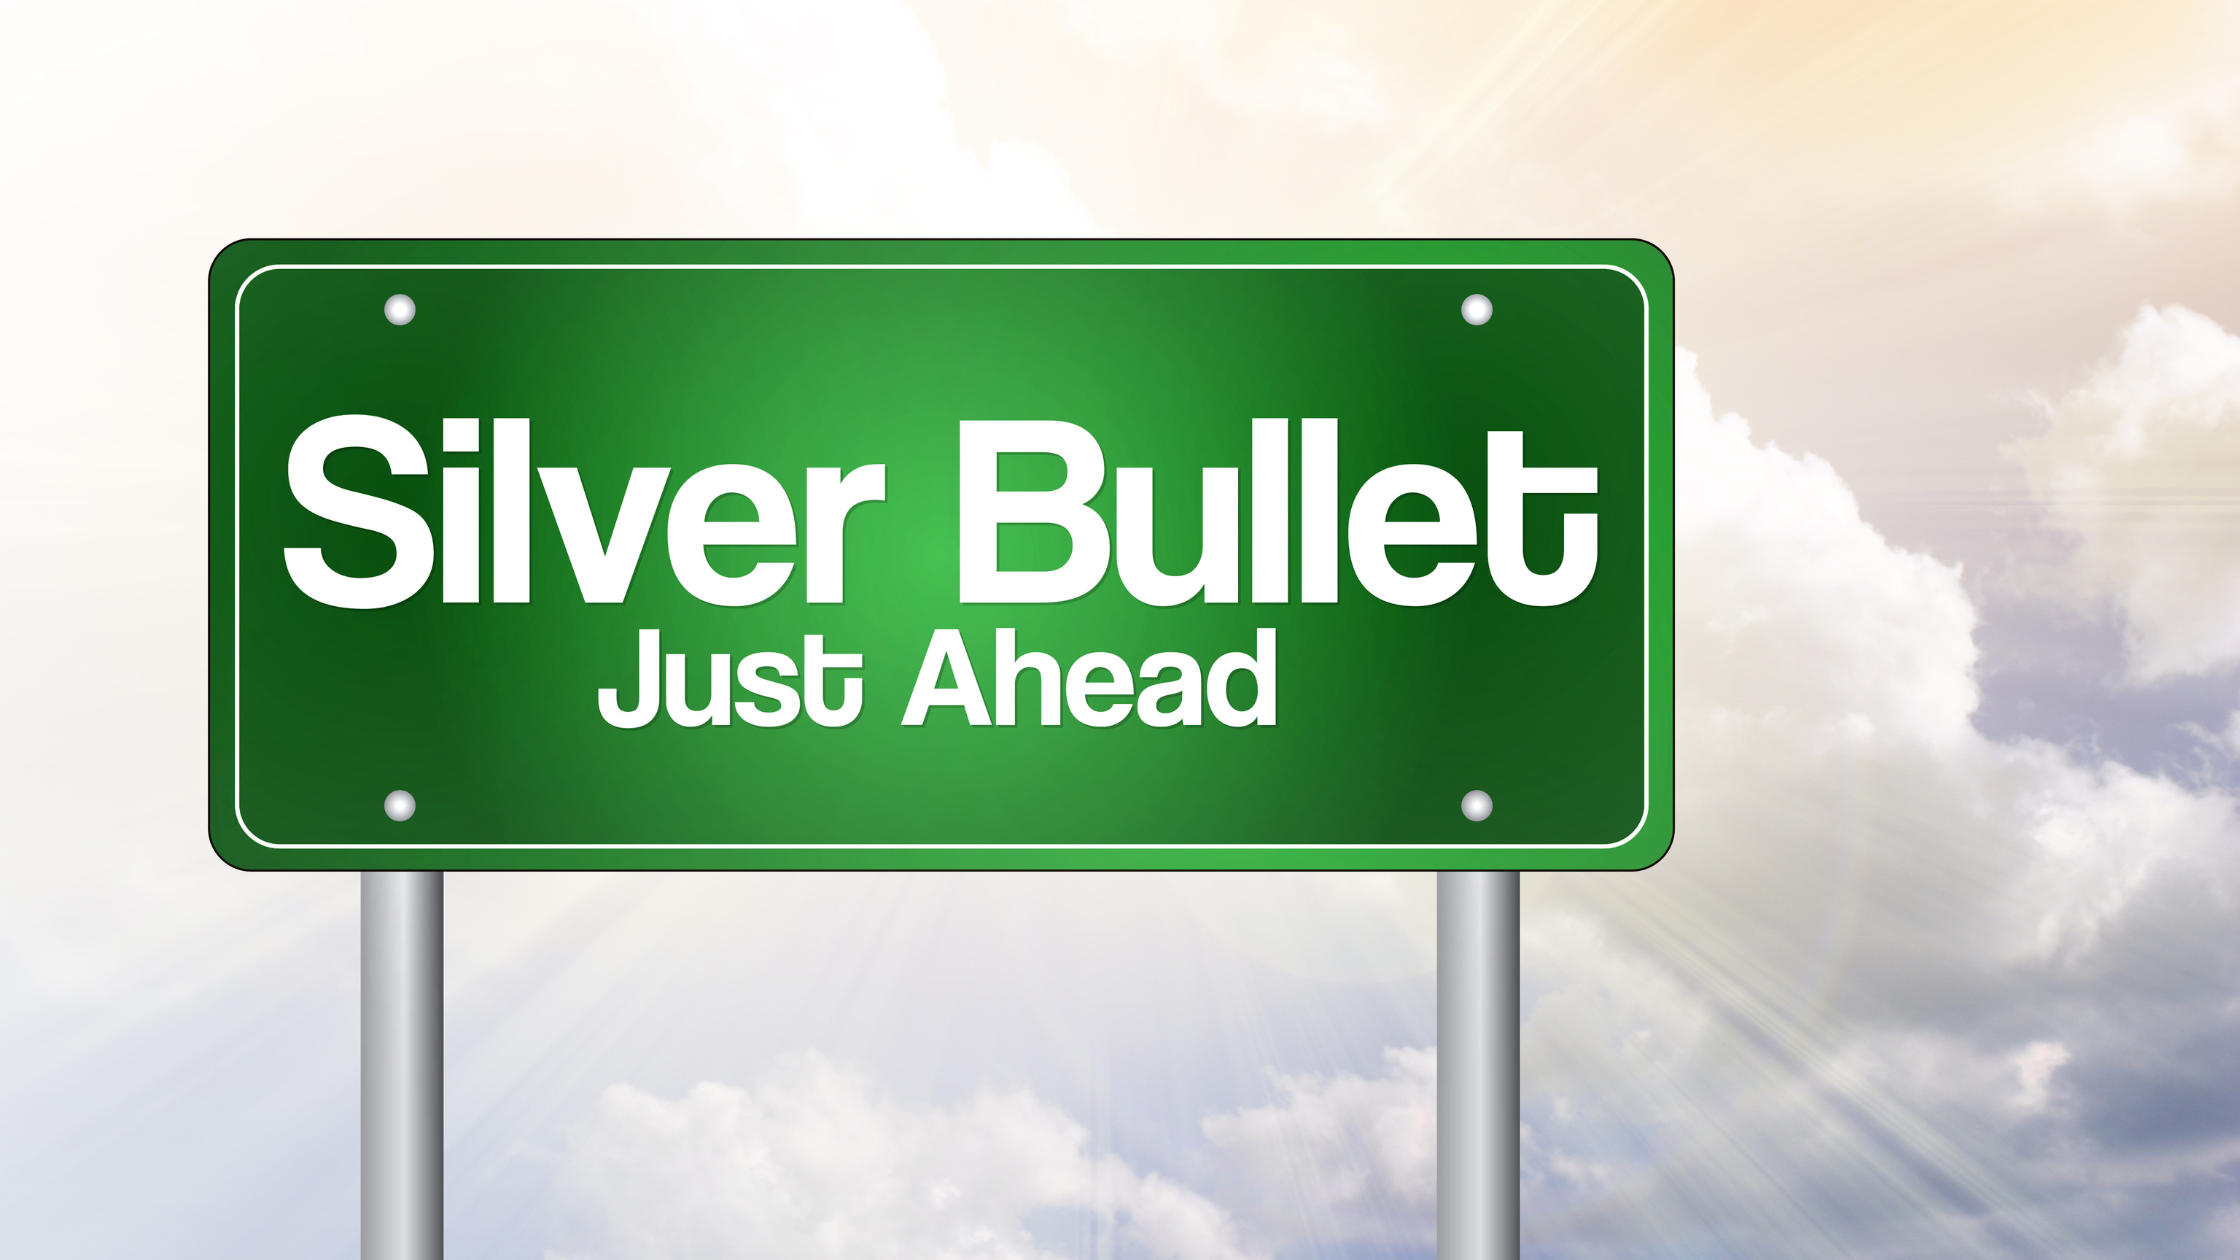 Exploring the Usage of the Term "Silver Bullet" Among Colleagues